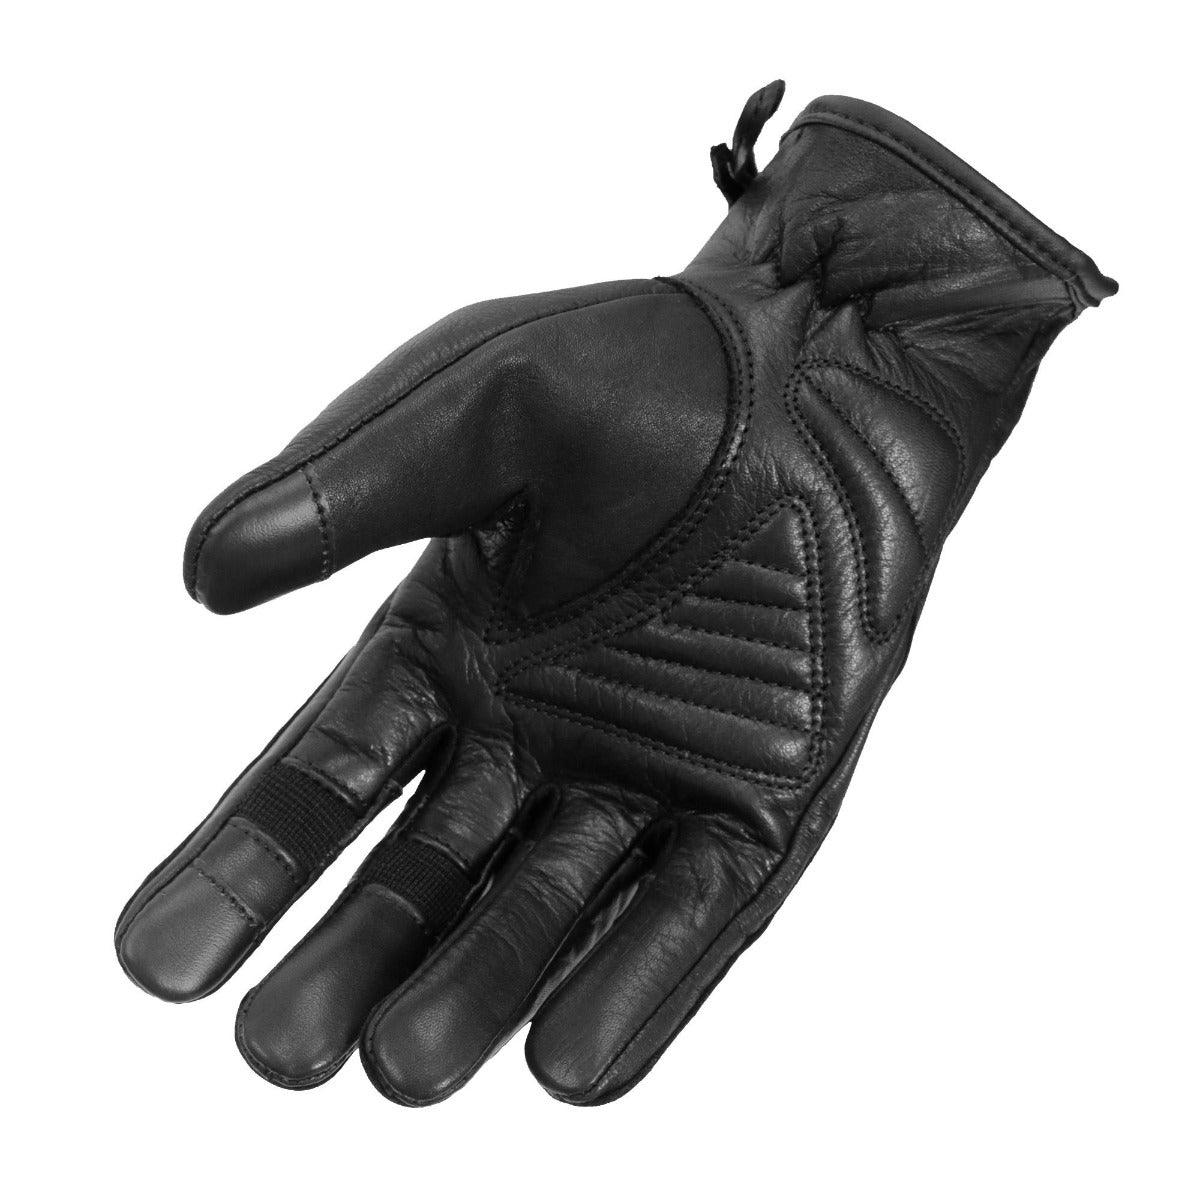 Hot Leathers Ladies Leather Gloves With Side Laces - American Legend Rider